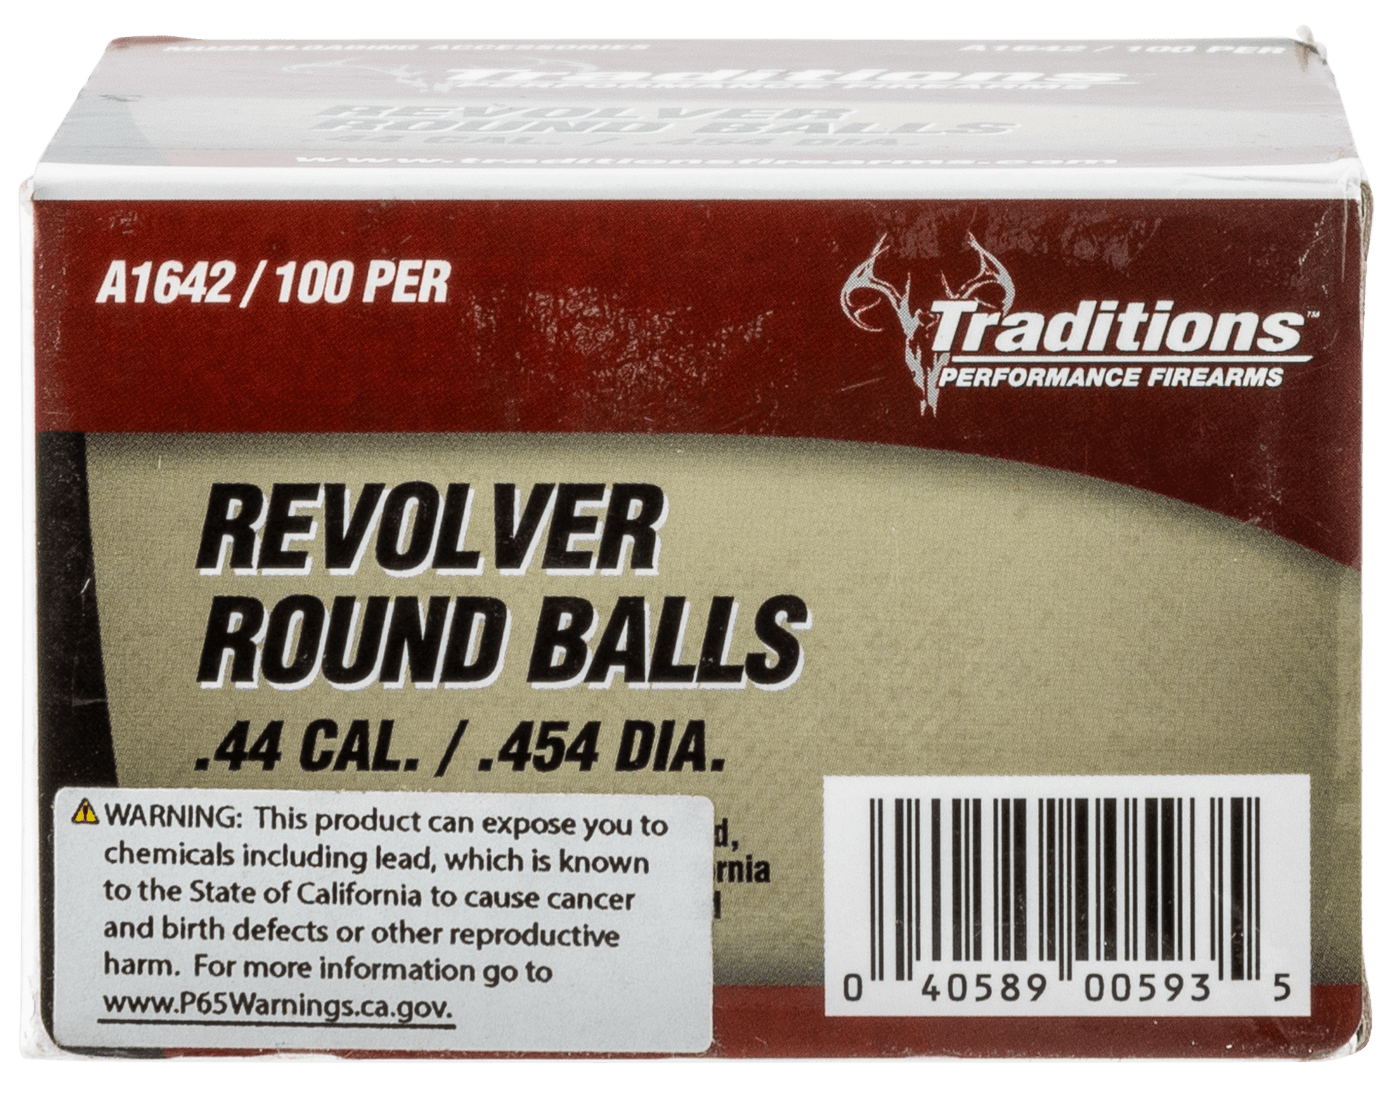 Traditions Traditions Revolver, Trad A1642    Revlvr Round Ball .454  100 Muzzleloading